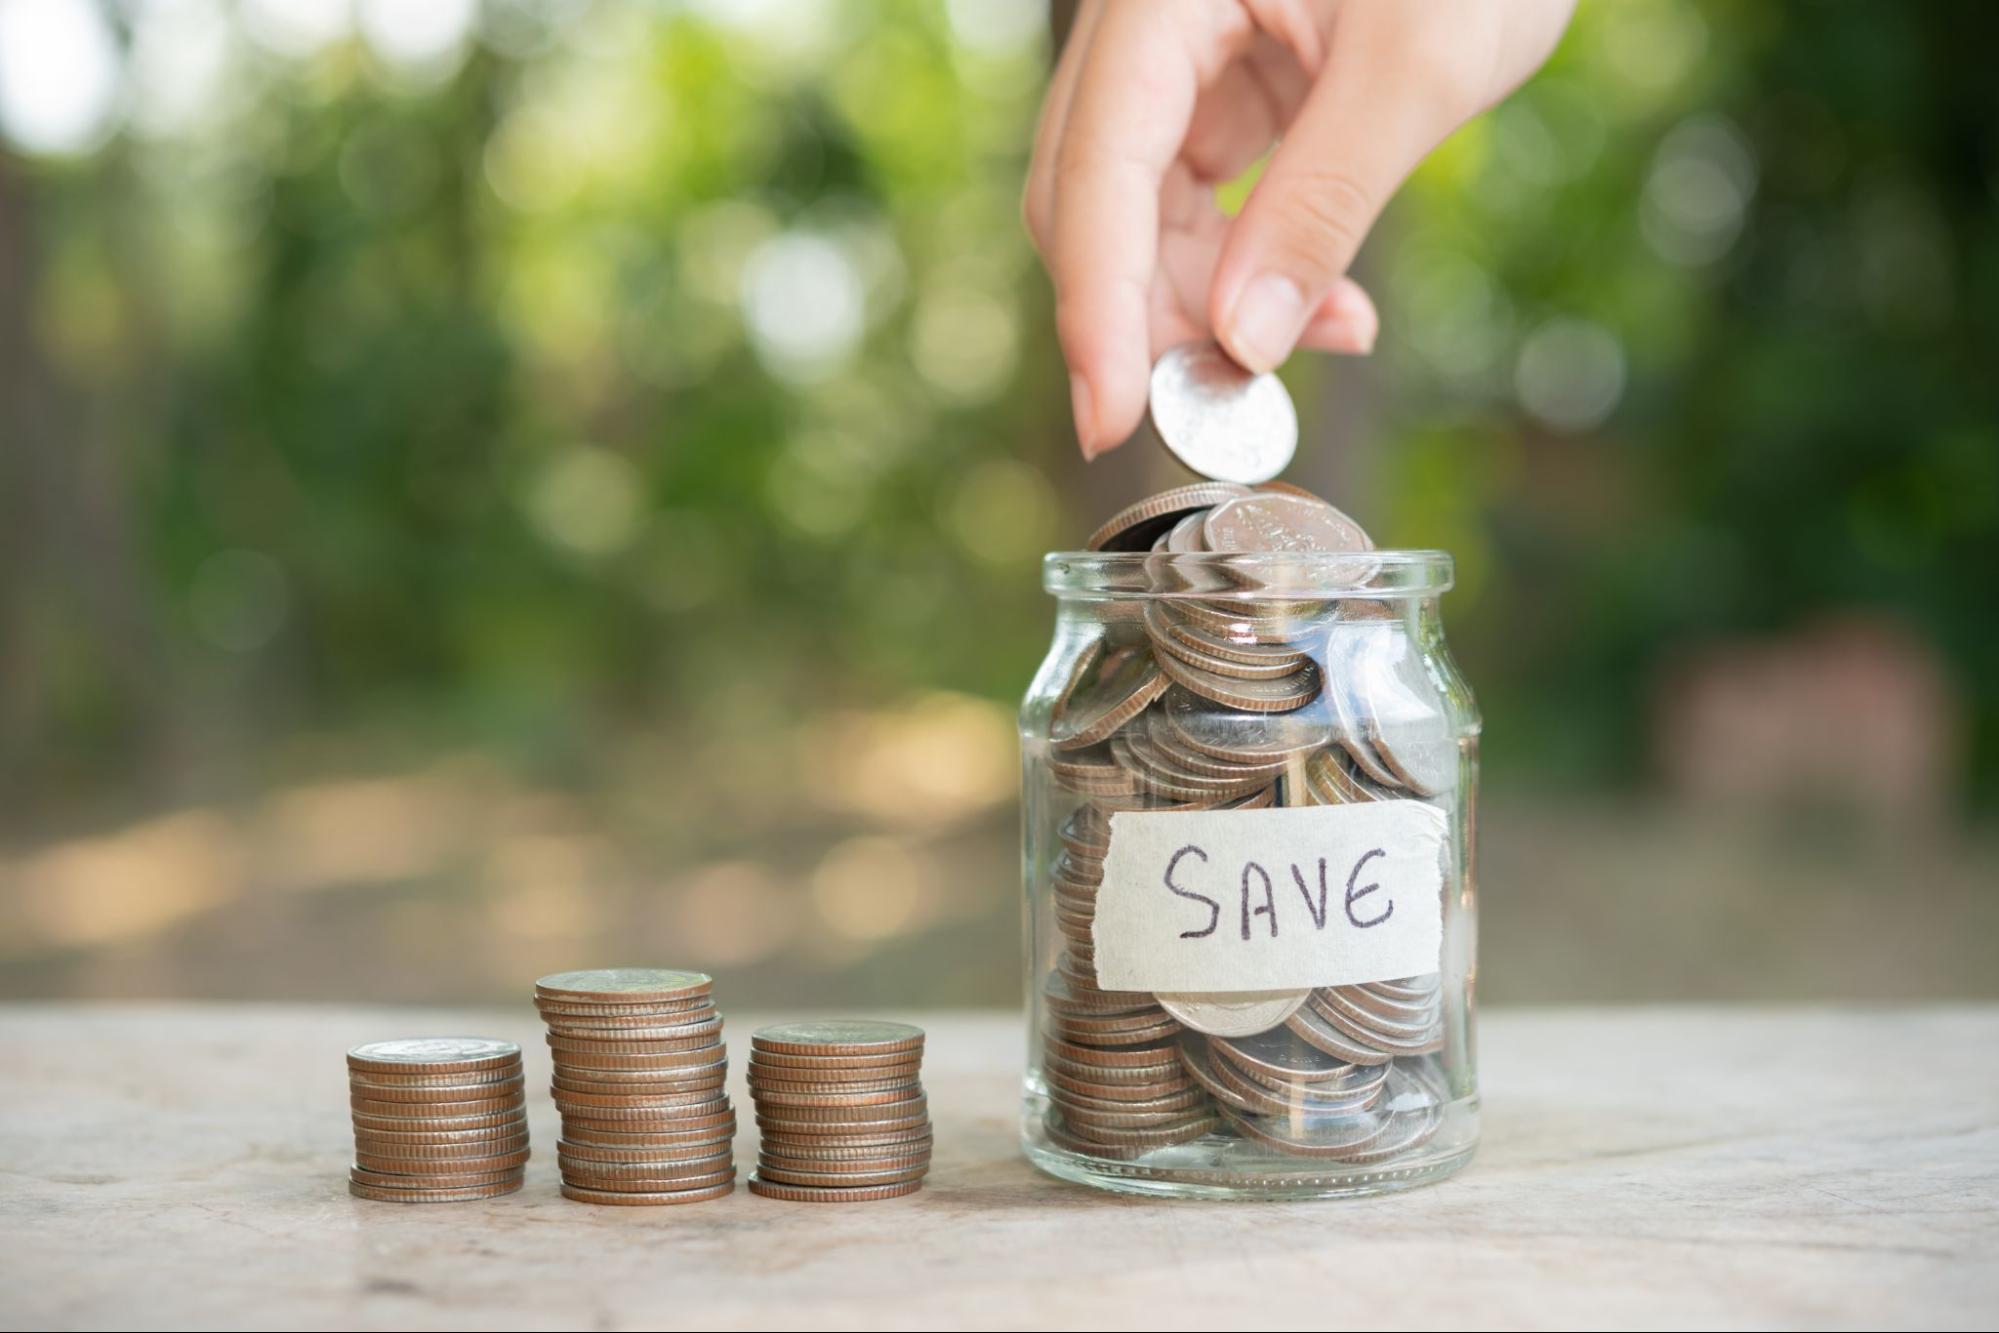 Here are 10 Daily Saving Tips You Can Implement Now